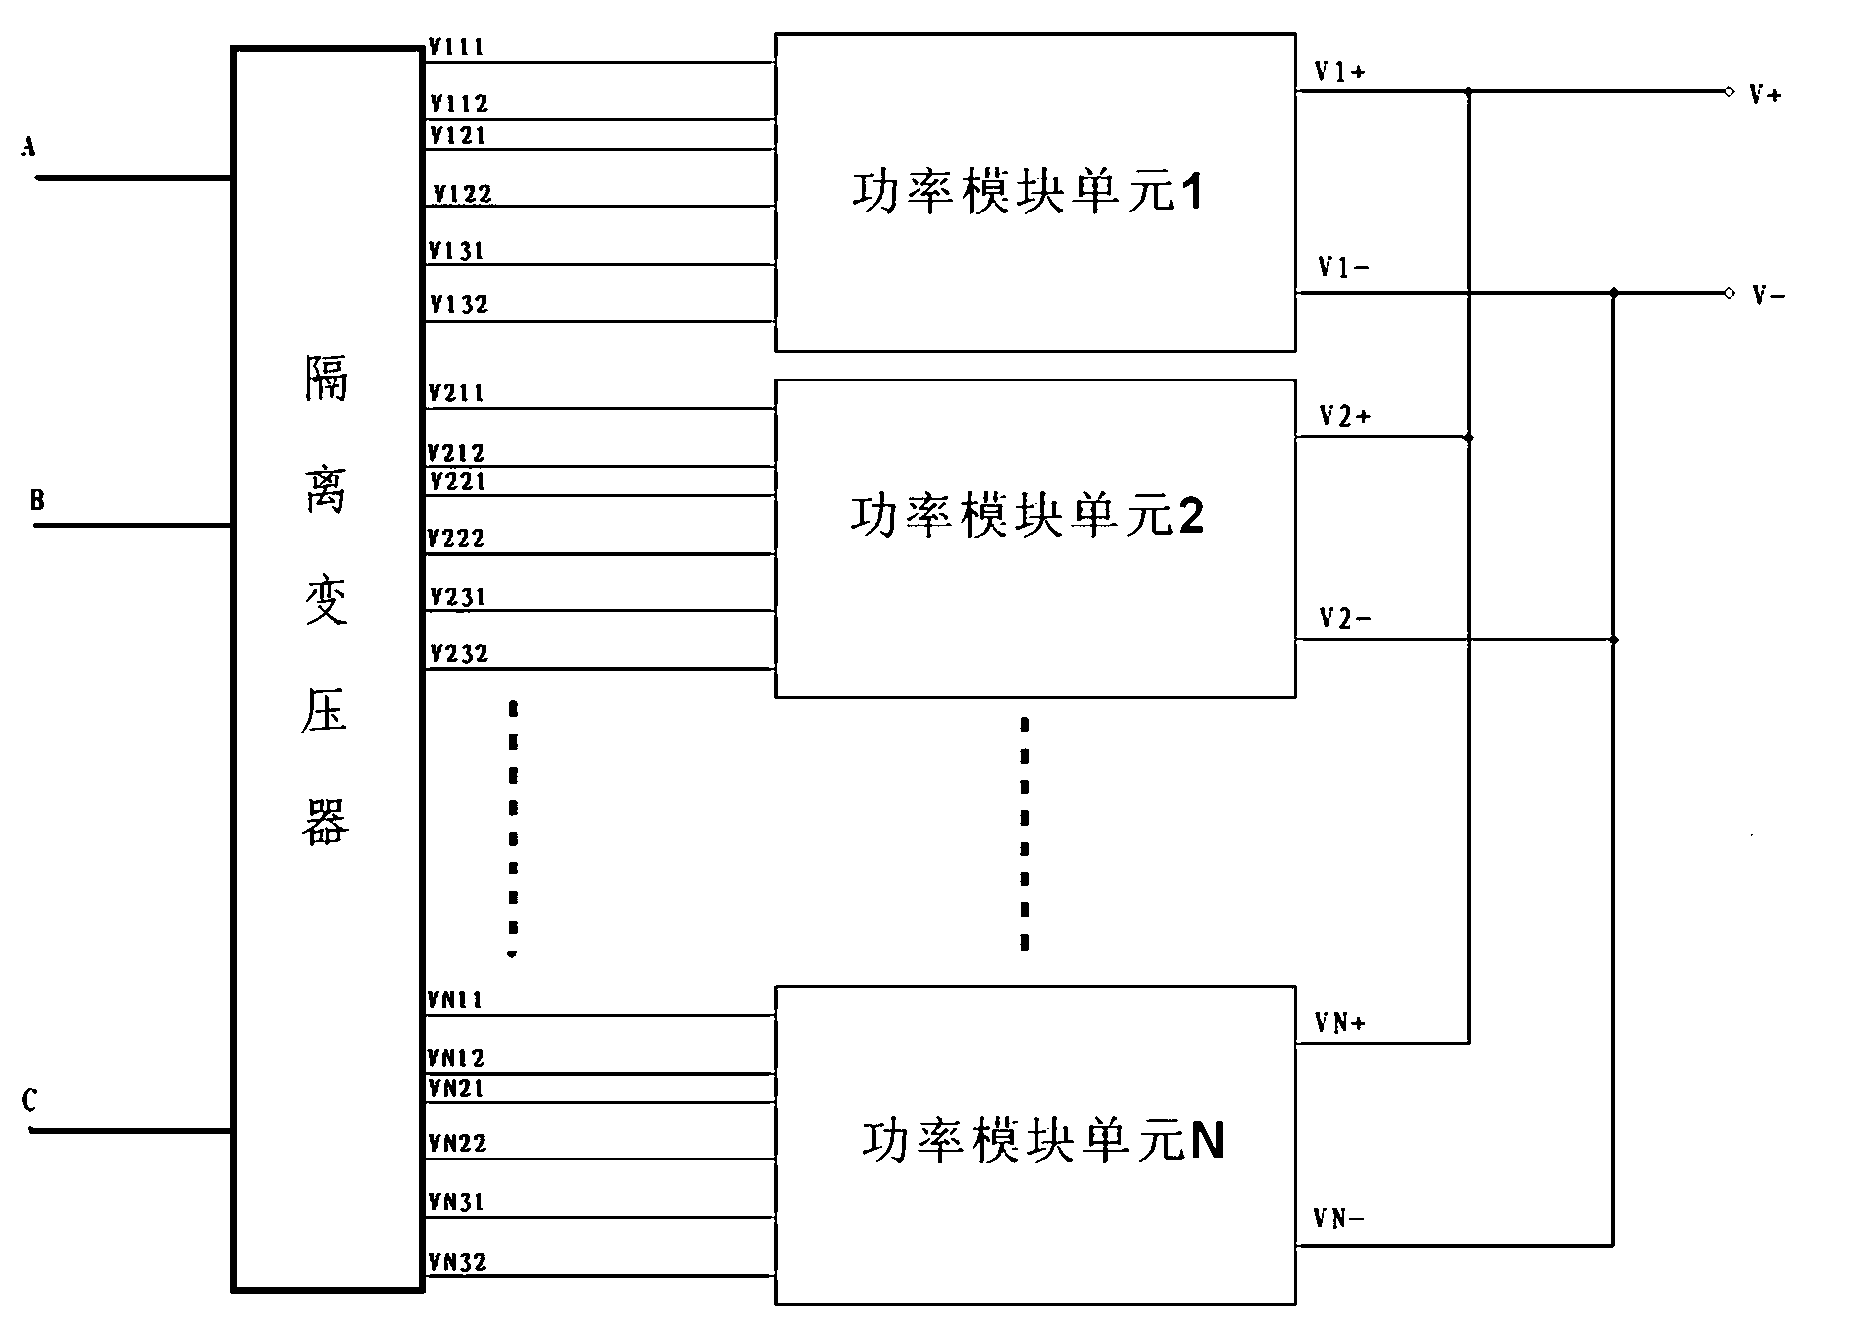 Large-capacity inversion grid-connected device